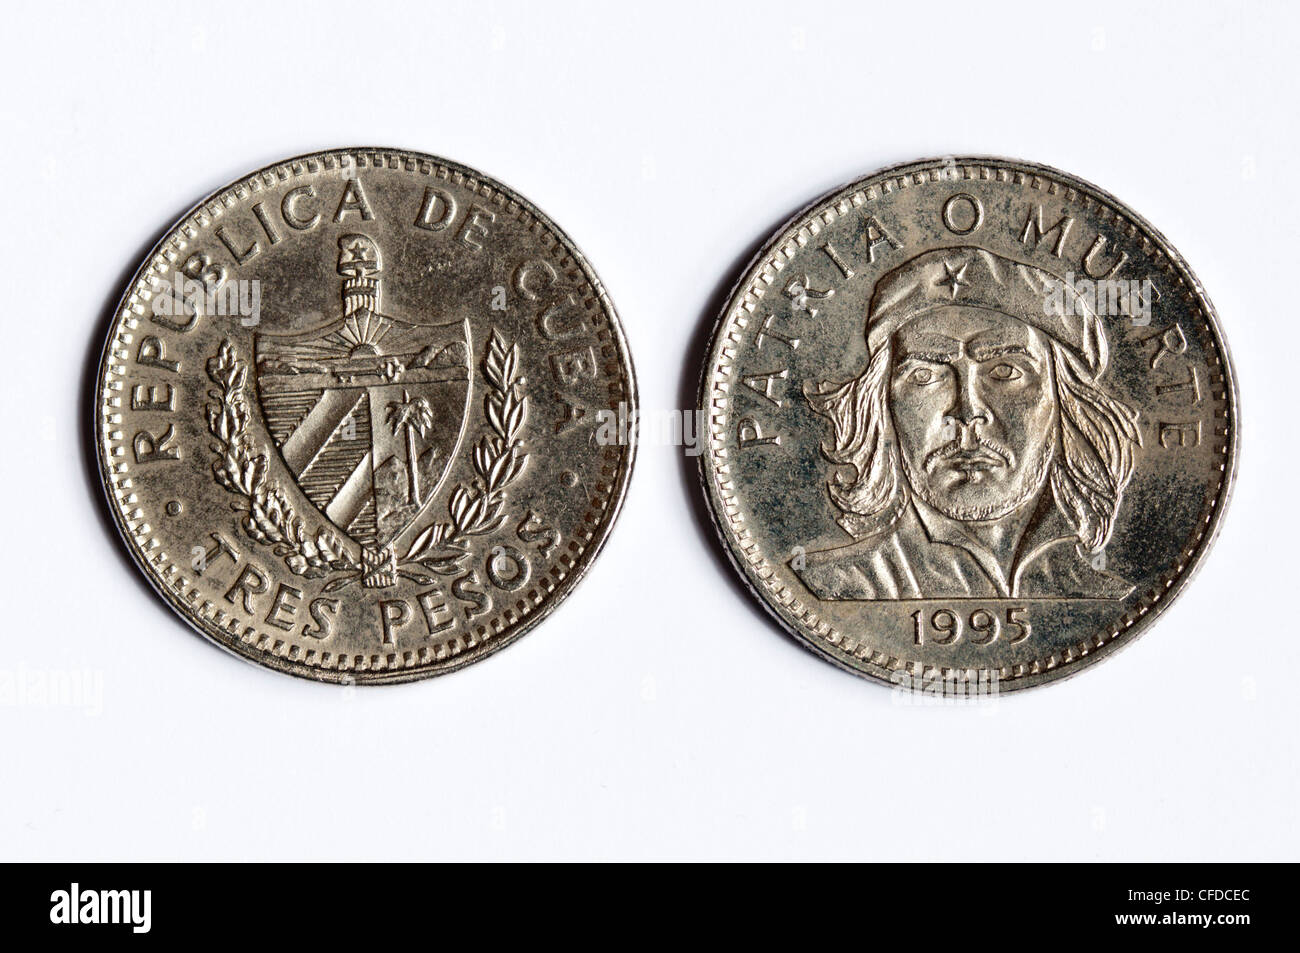 Both sides of Cuban 3 Pesos coin with image of Che Guevara. Stock Photo